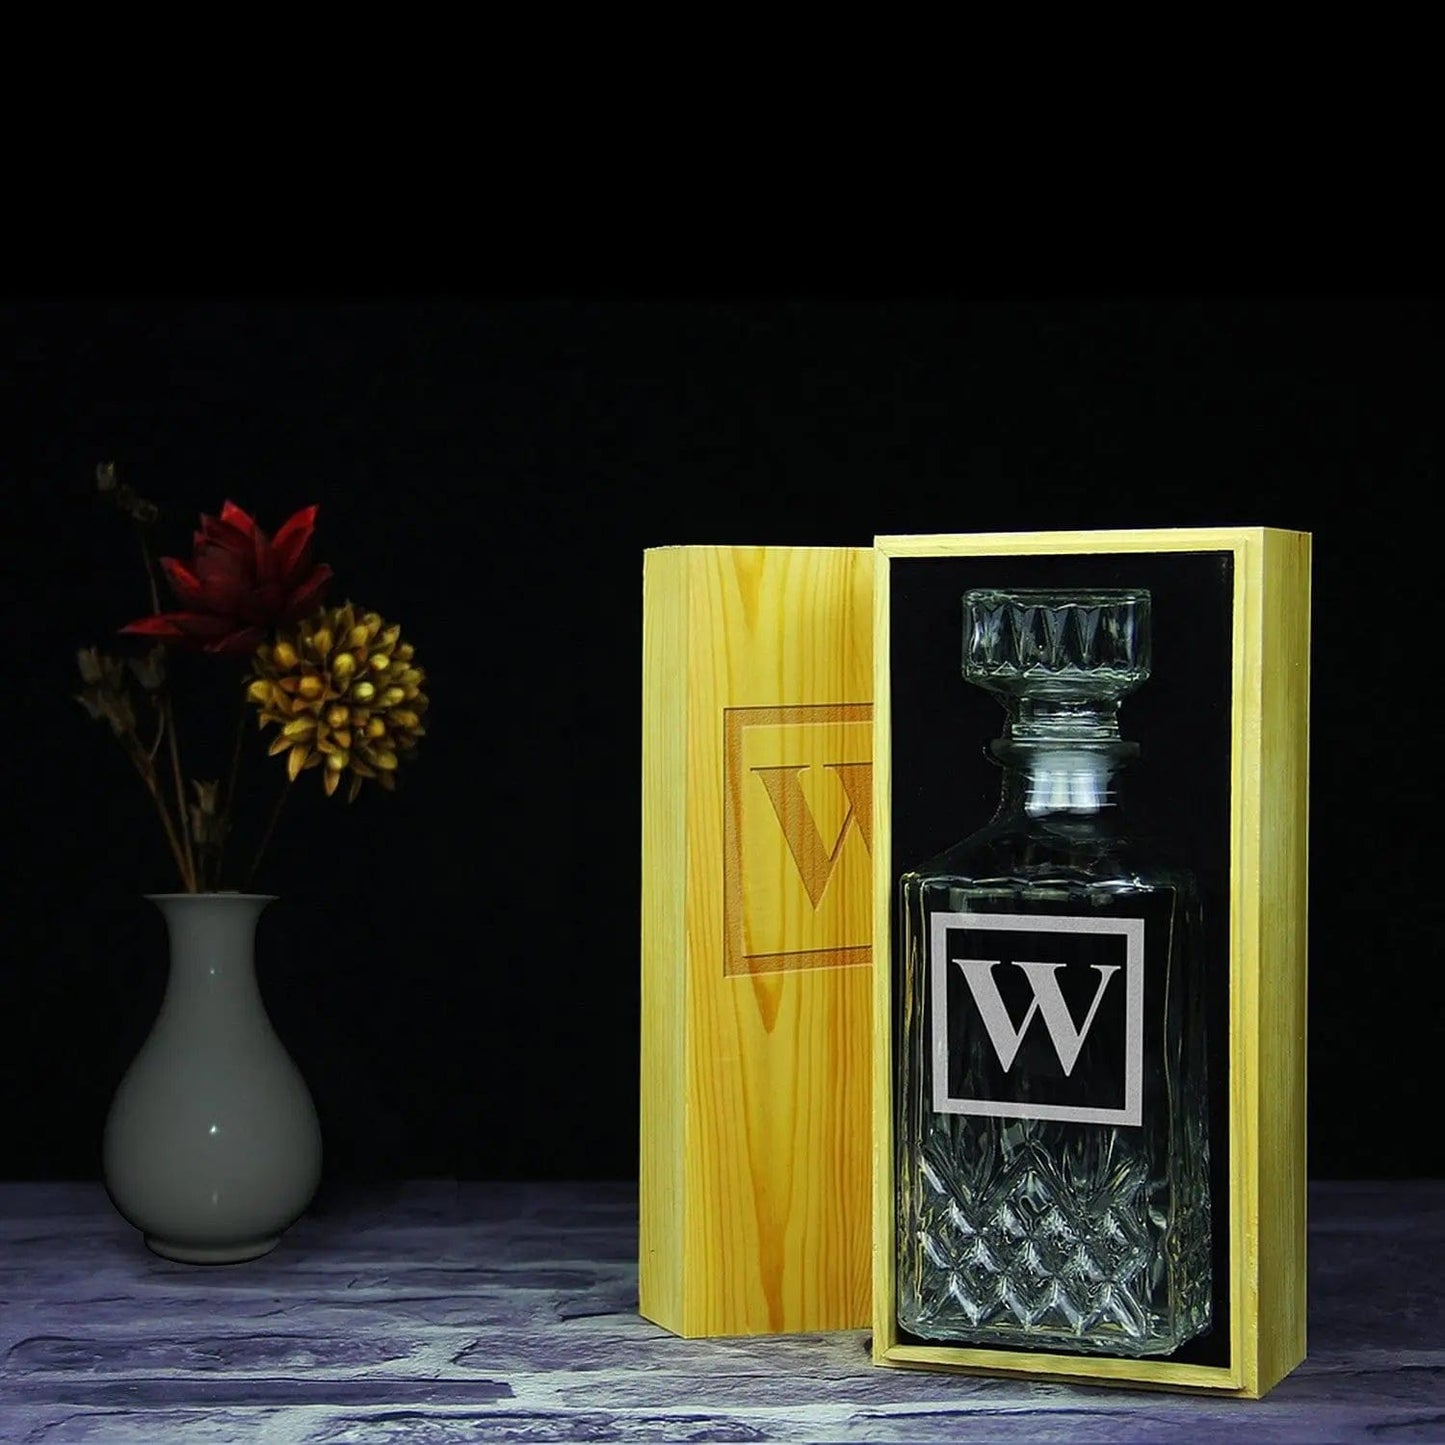 Groomsmen Gifts, Personalized Etched Decanter GiftideaStutio